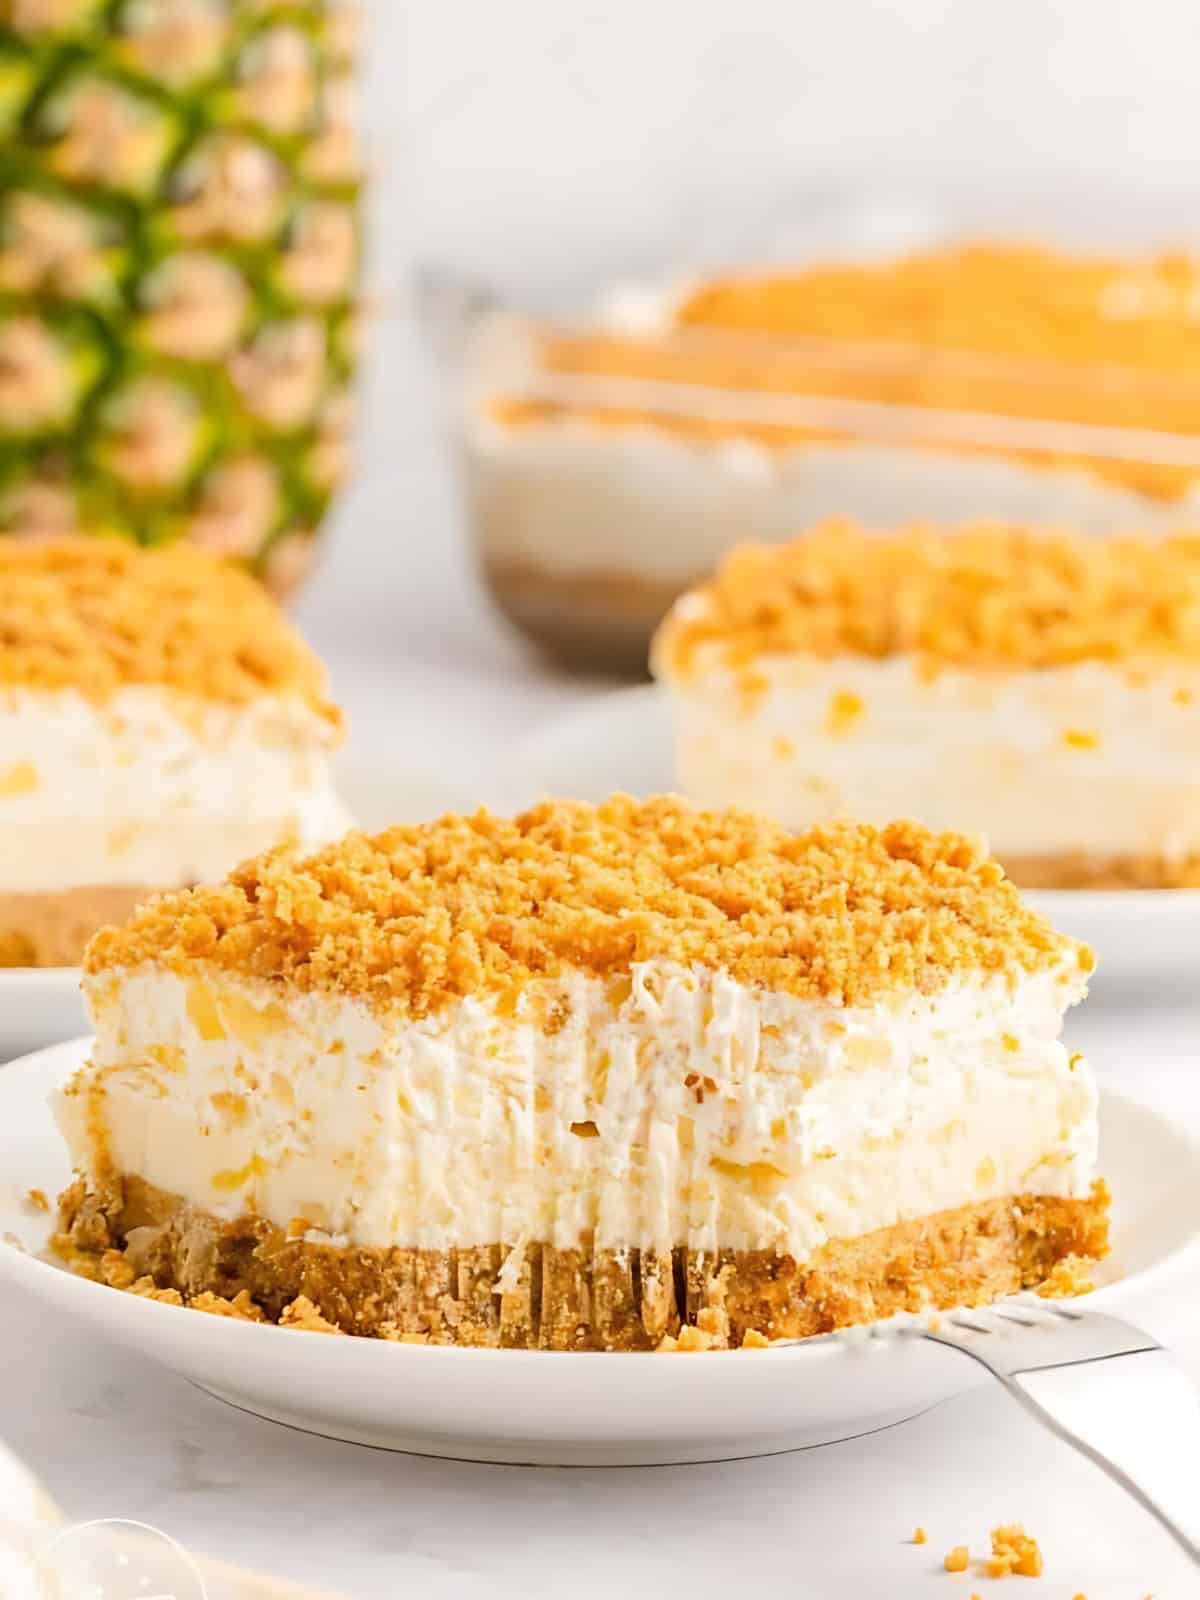 A slice of pineapple dream dessert topped with crunch graham bits on a plate.